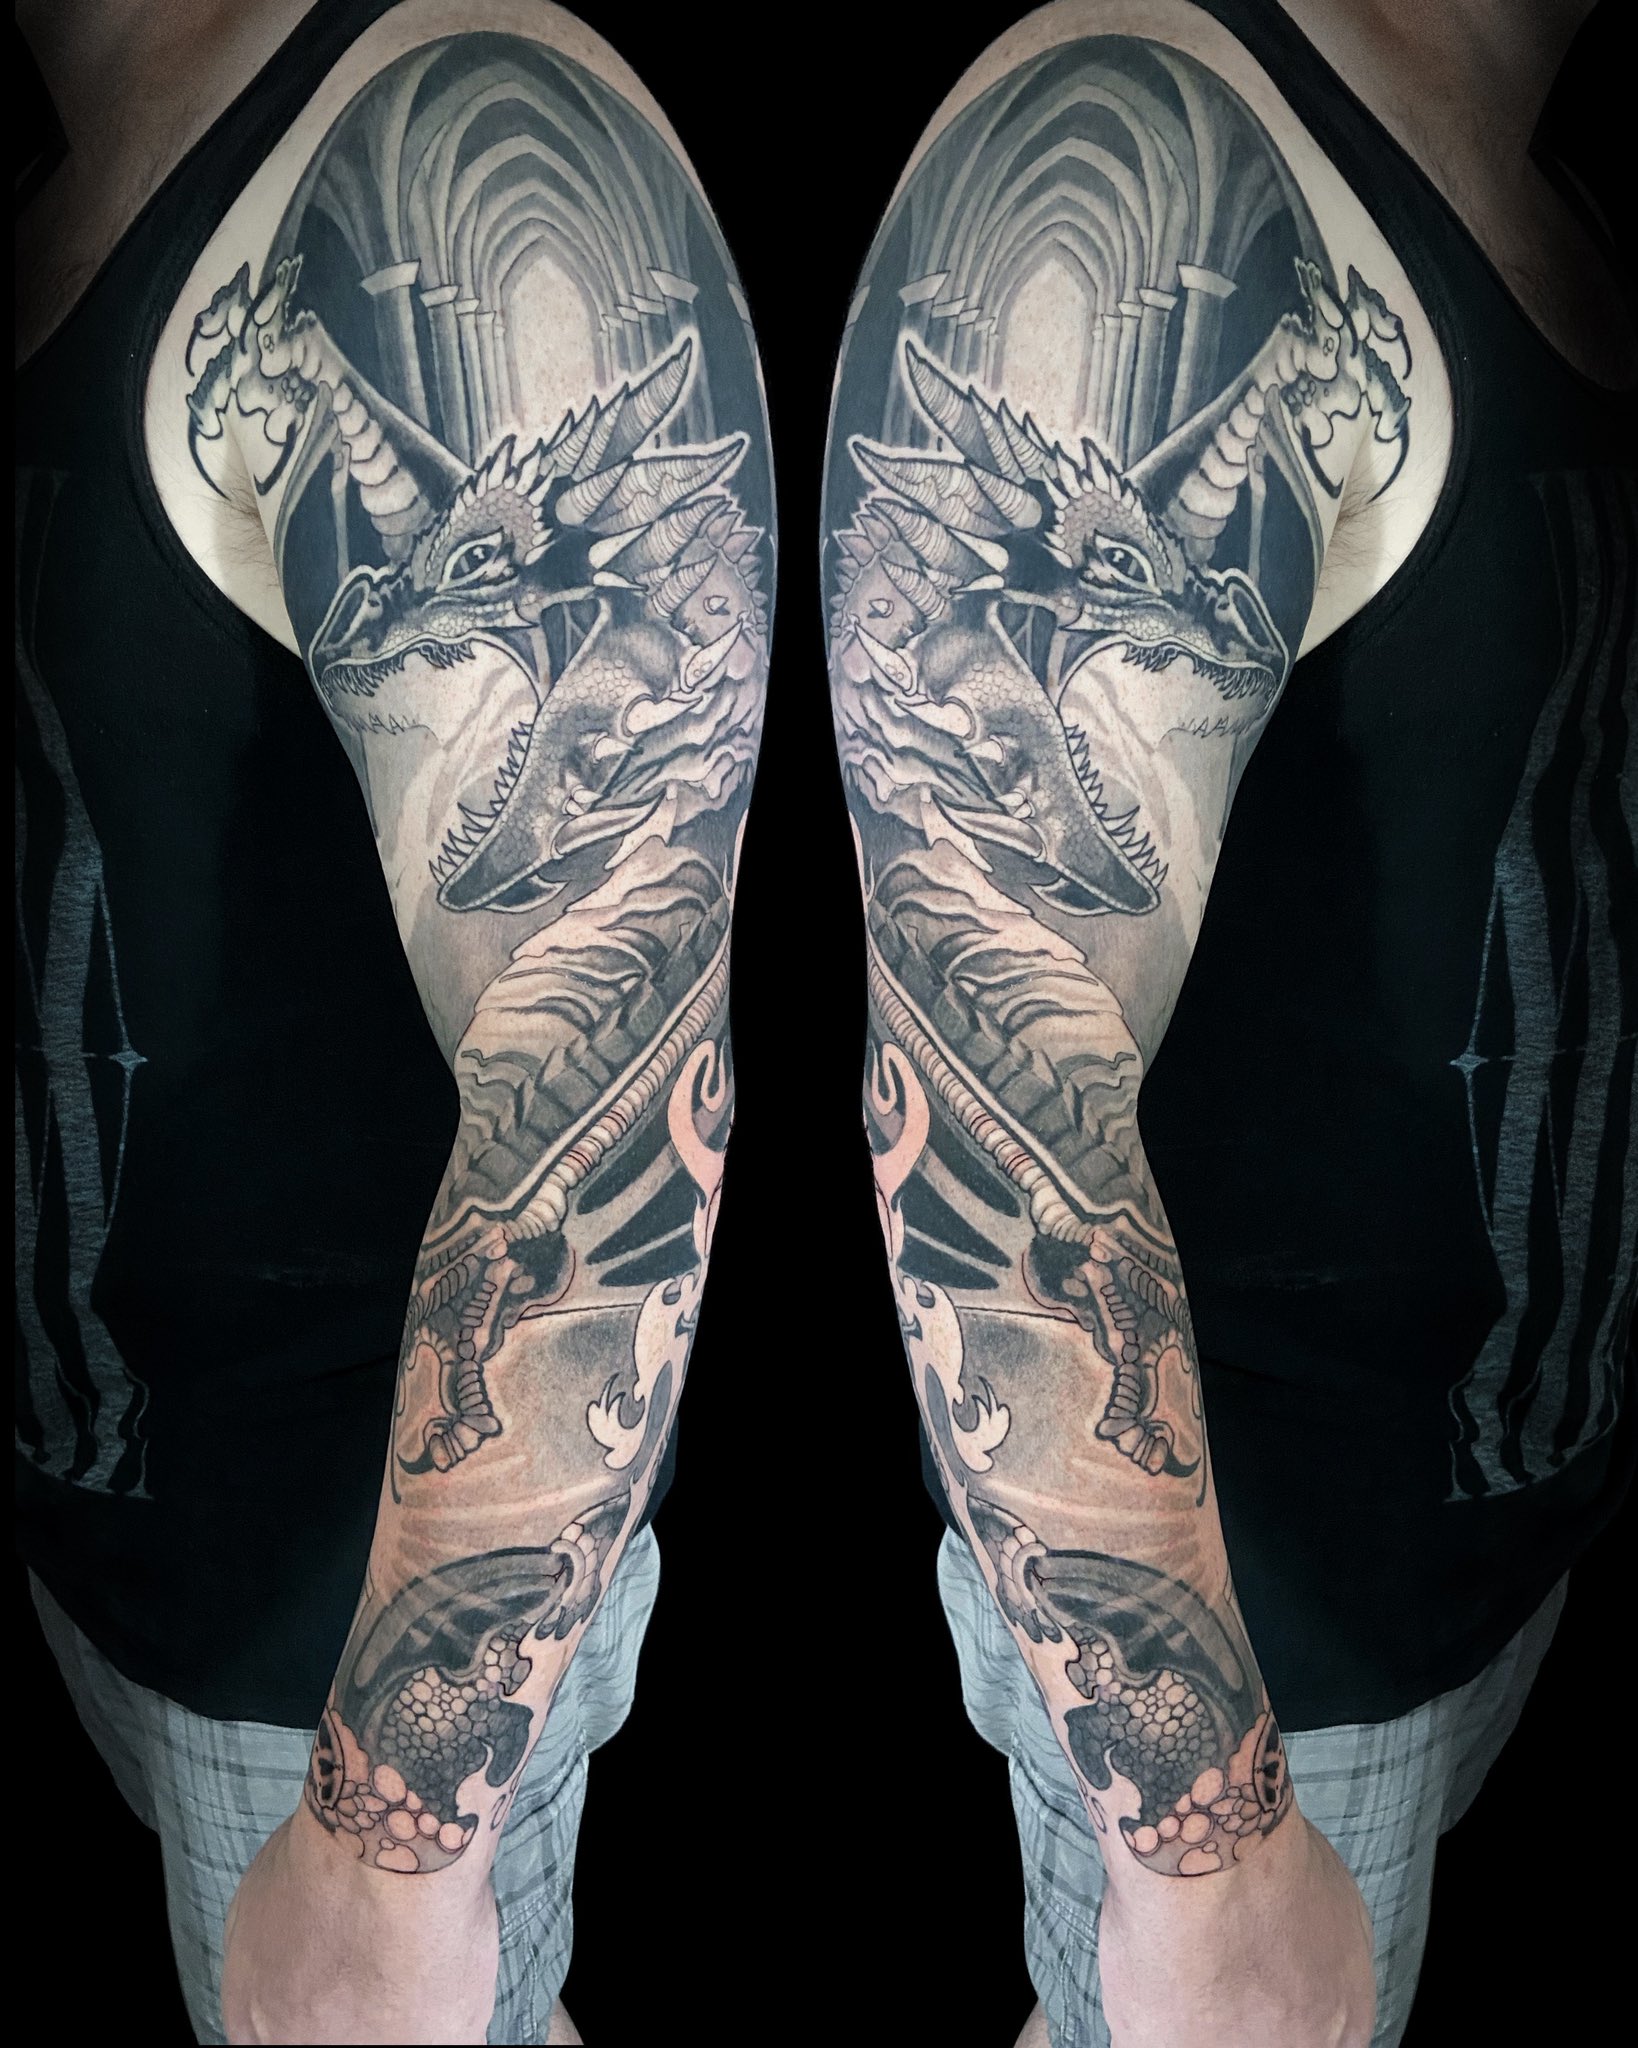 11+ Dragon Sleeve Tattoo Ideas You'll Have to See to Believe!